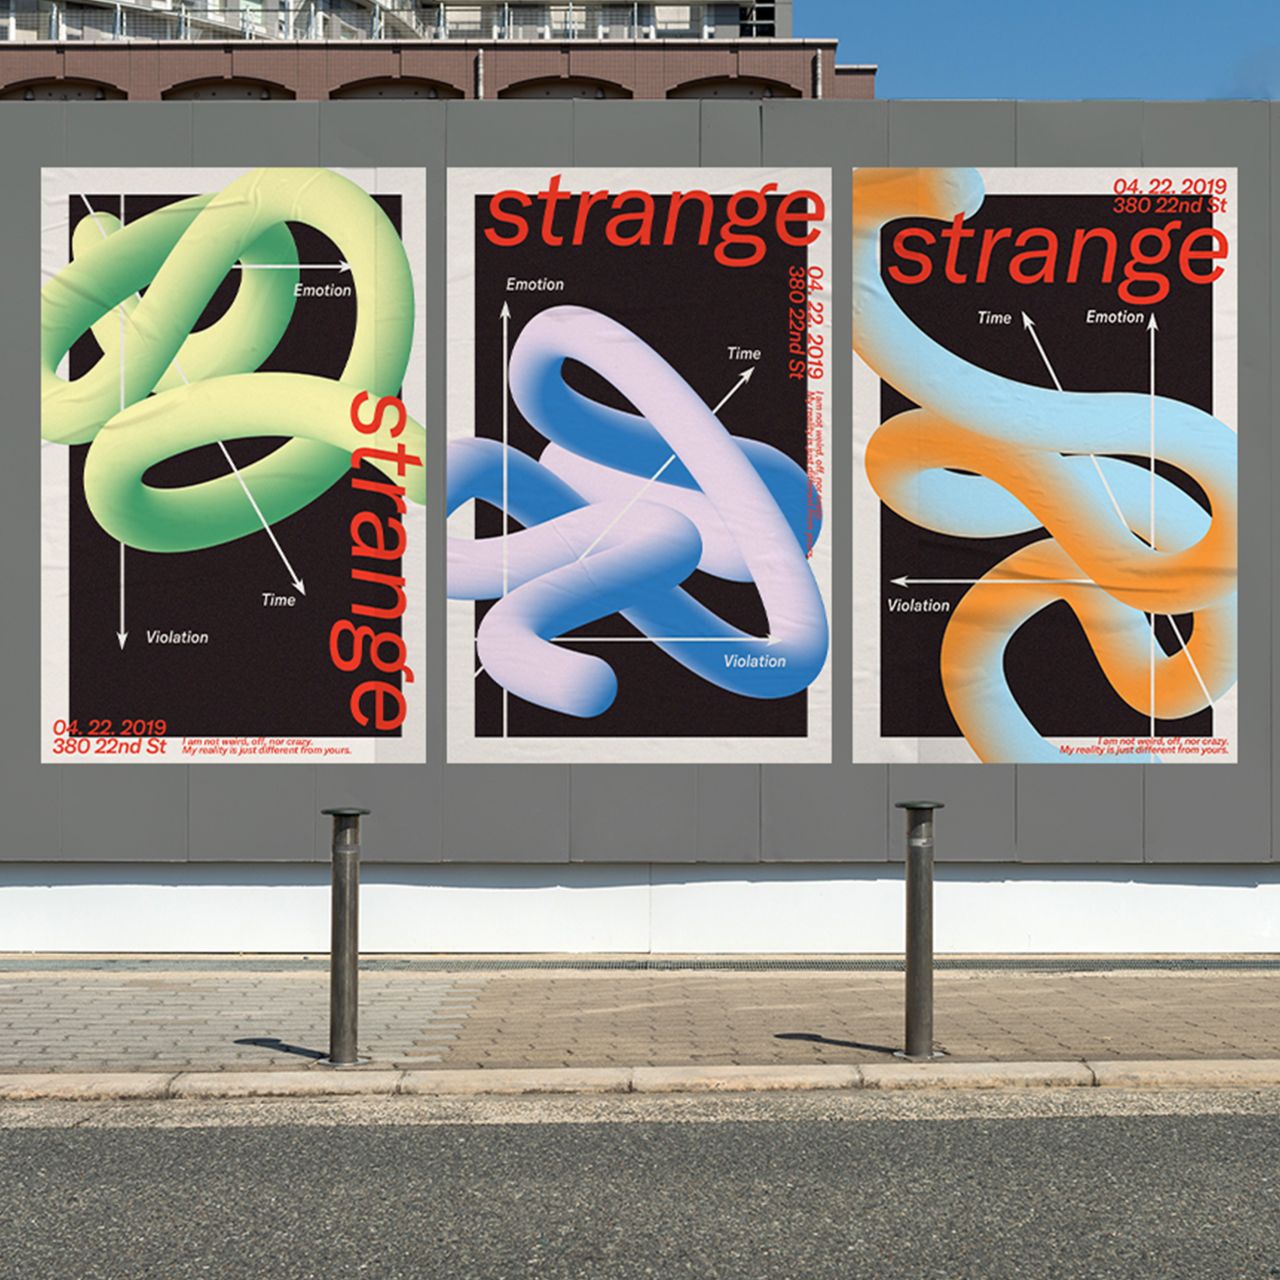 Strange Poster Series by Danyang Ma for Pratt Institute. Bronze A' Design Award Winner for Graphics and Visual Communication Design Category in 2019